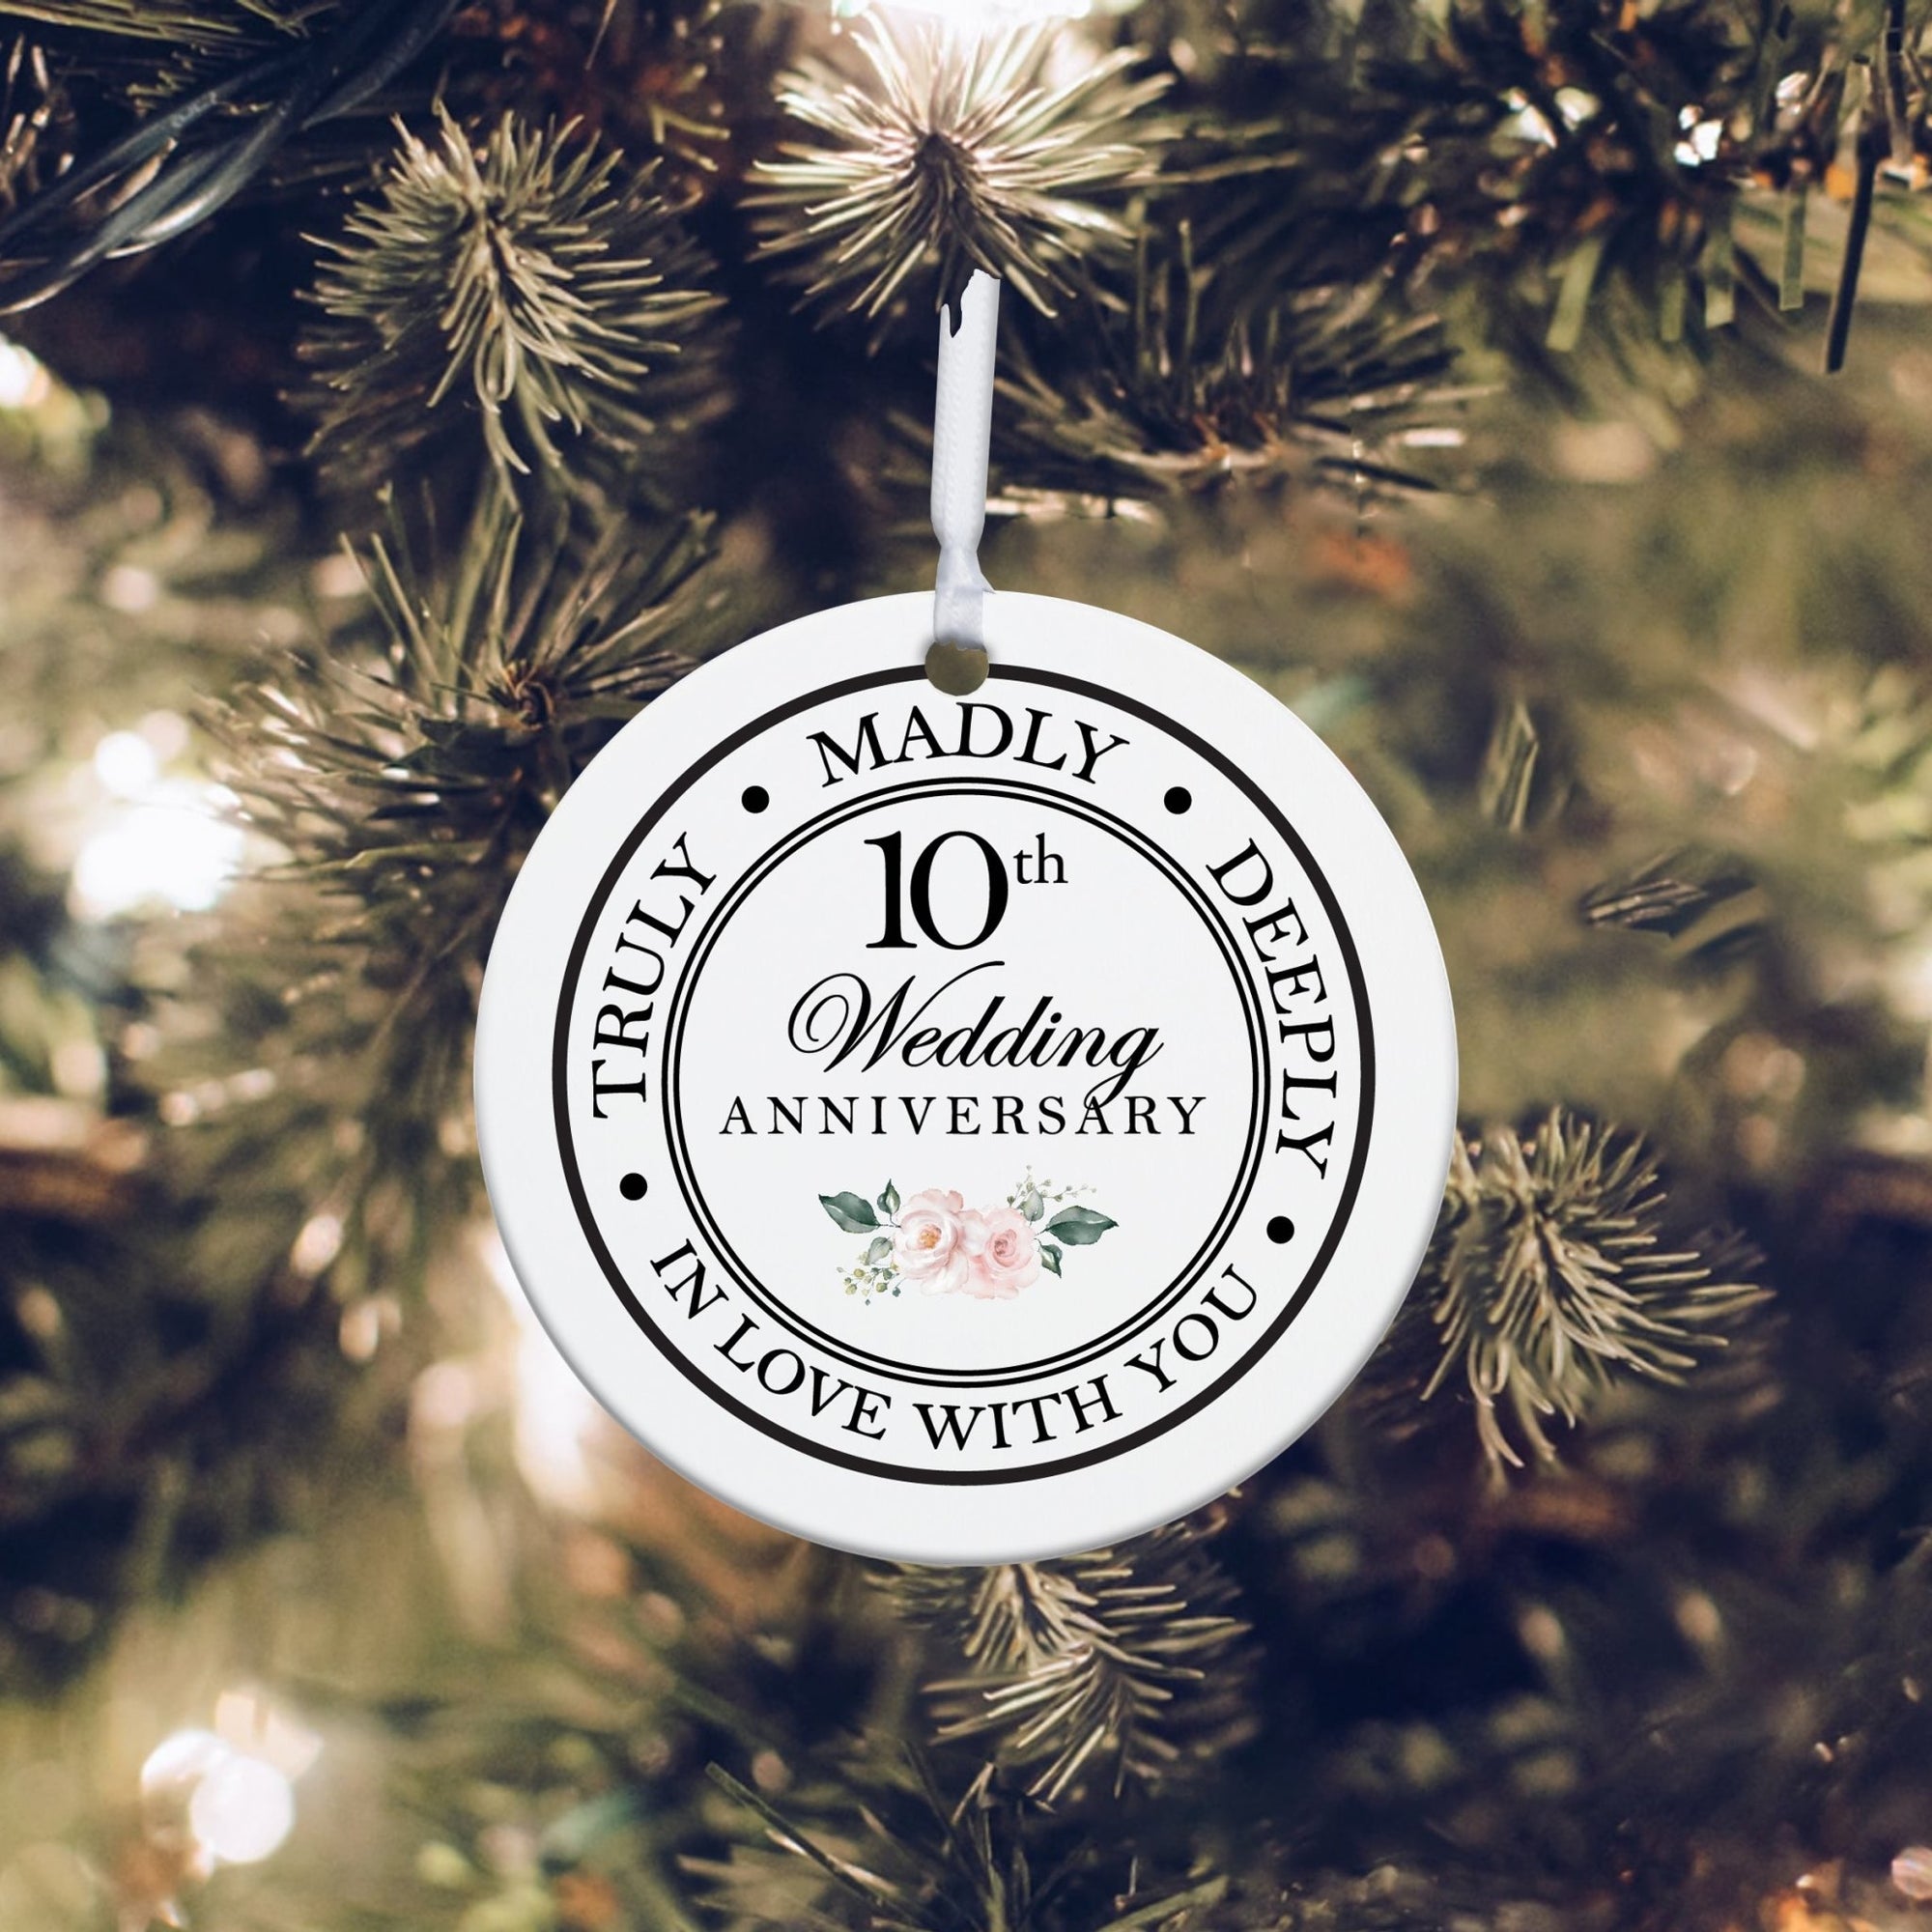 10th Wedding Anniversary White Ornament With Inspirational Message Gift Ideas - Truly, Madly, Deeply In Love With You - LifeSong Milestones